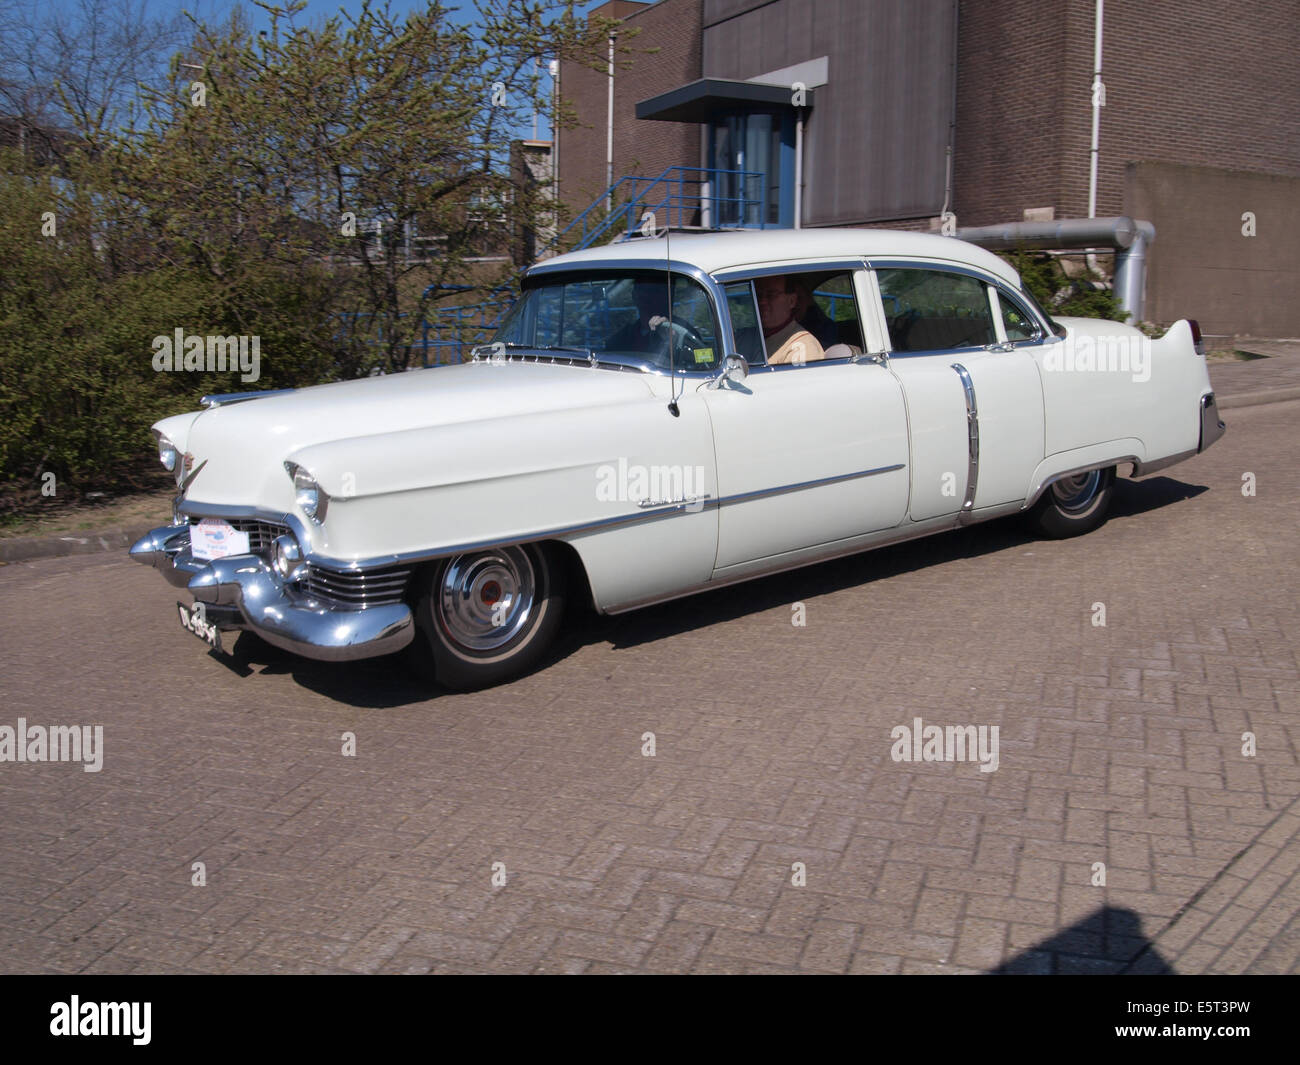 Cadillac 62 (1954), Dutch licence registration DL-20-59, pic11 Stock Photo